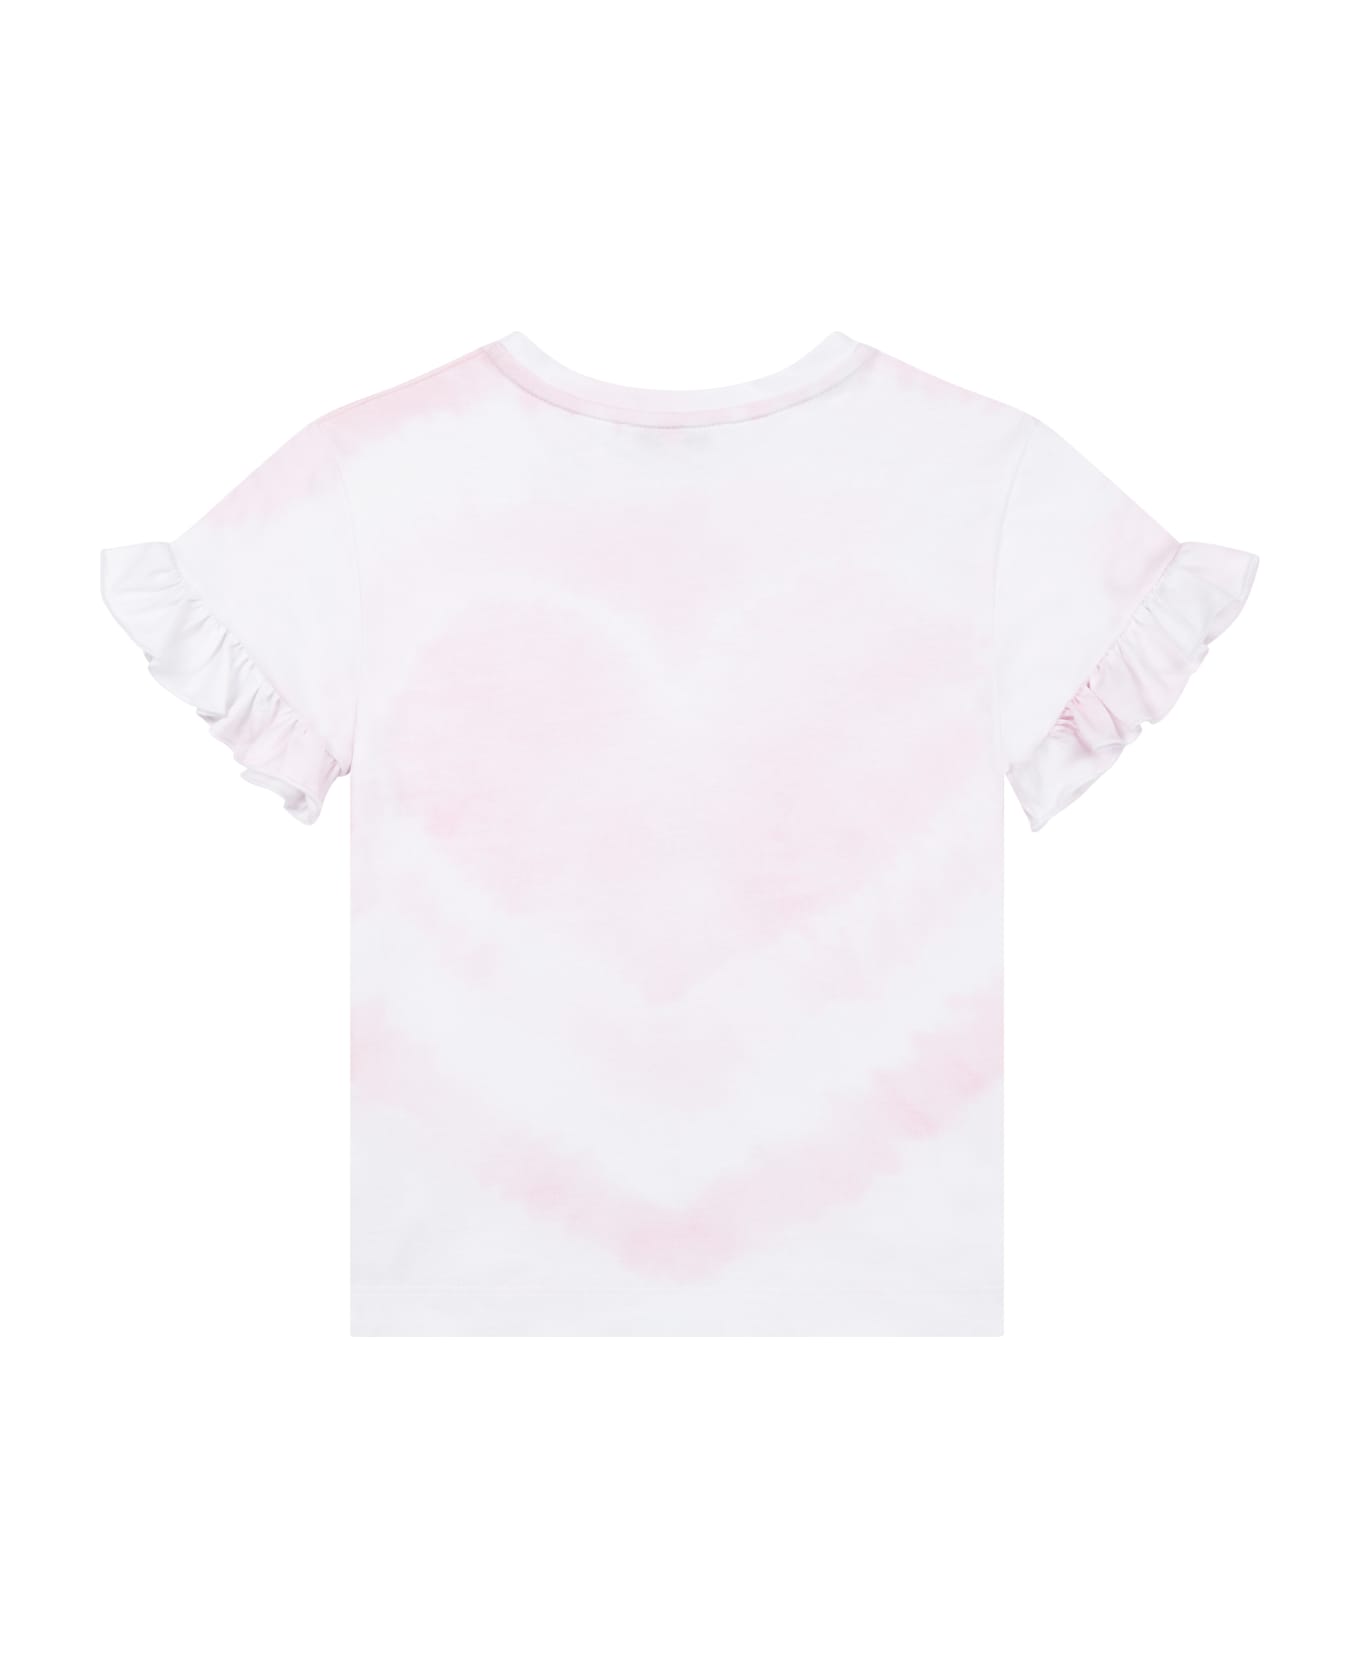 Givenchy T-shirt With Logo - Pink